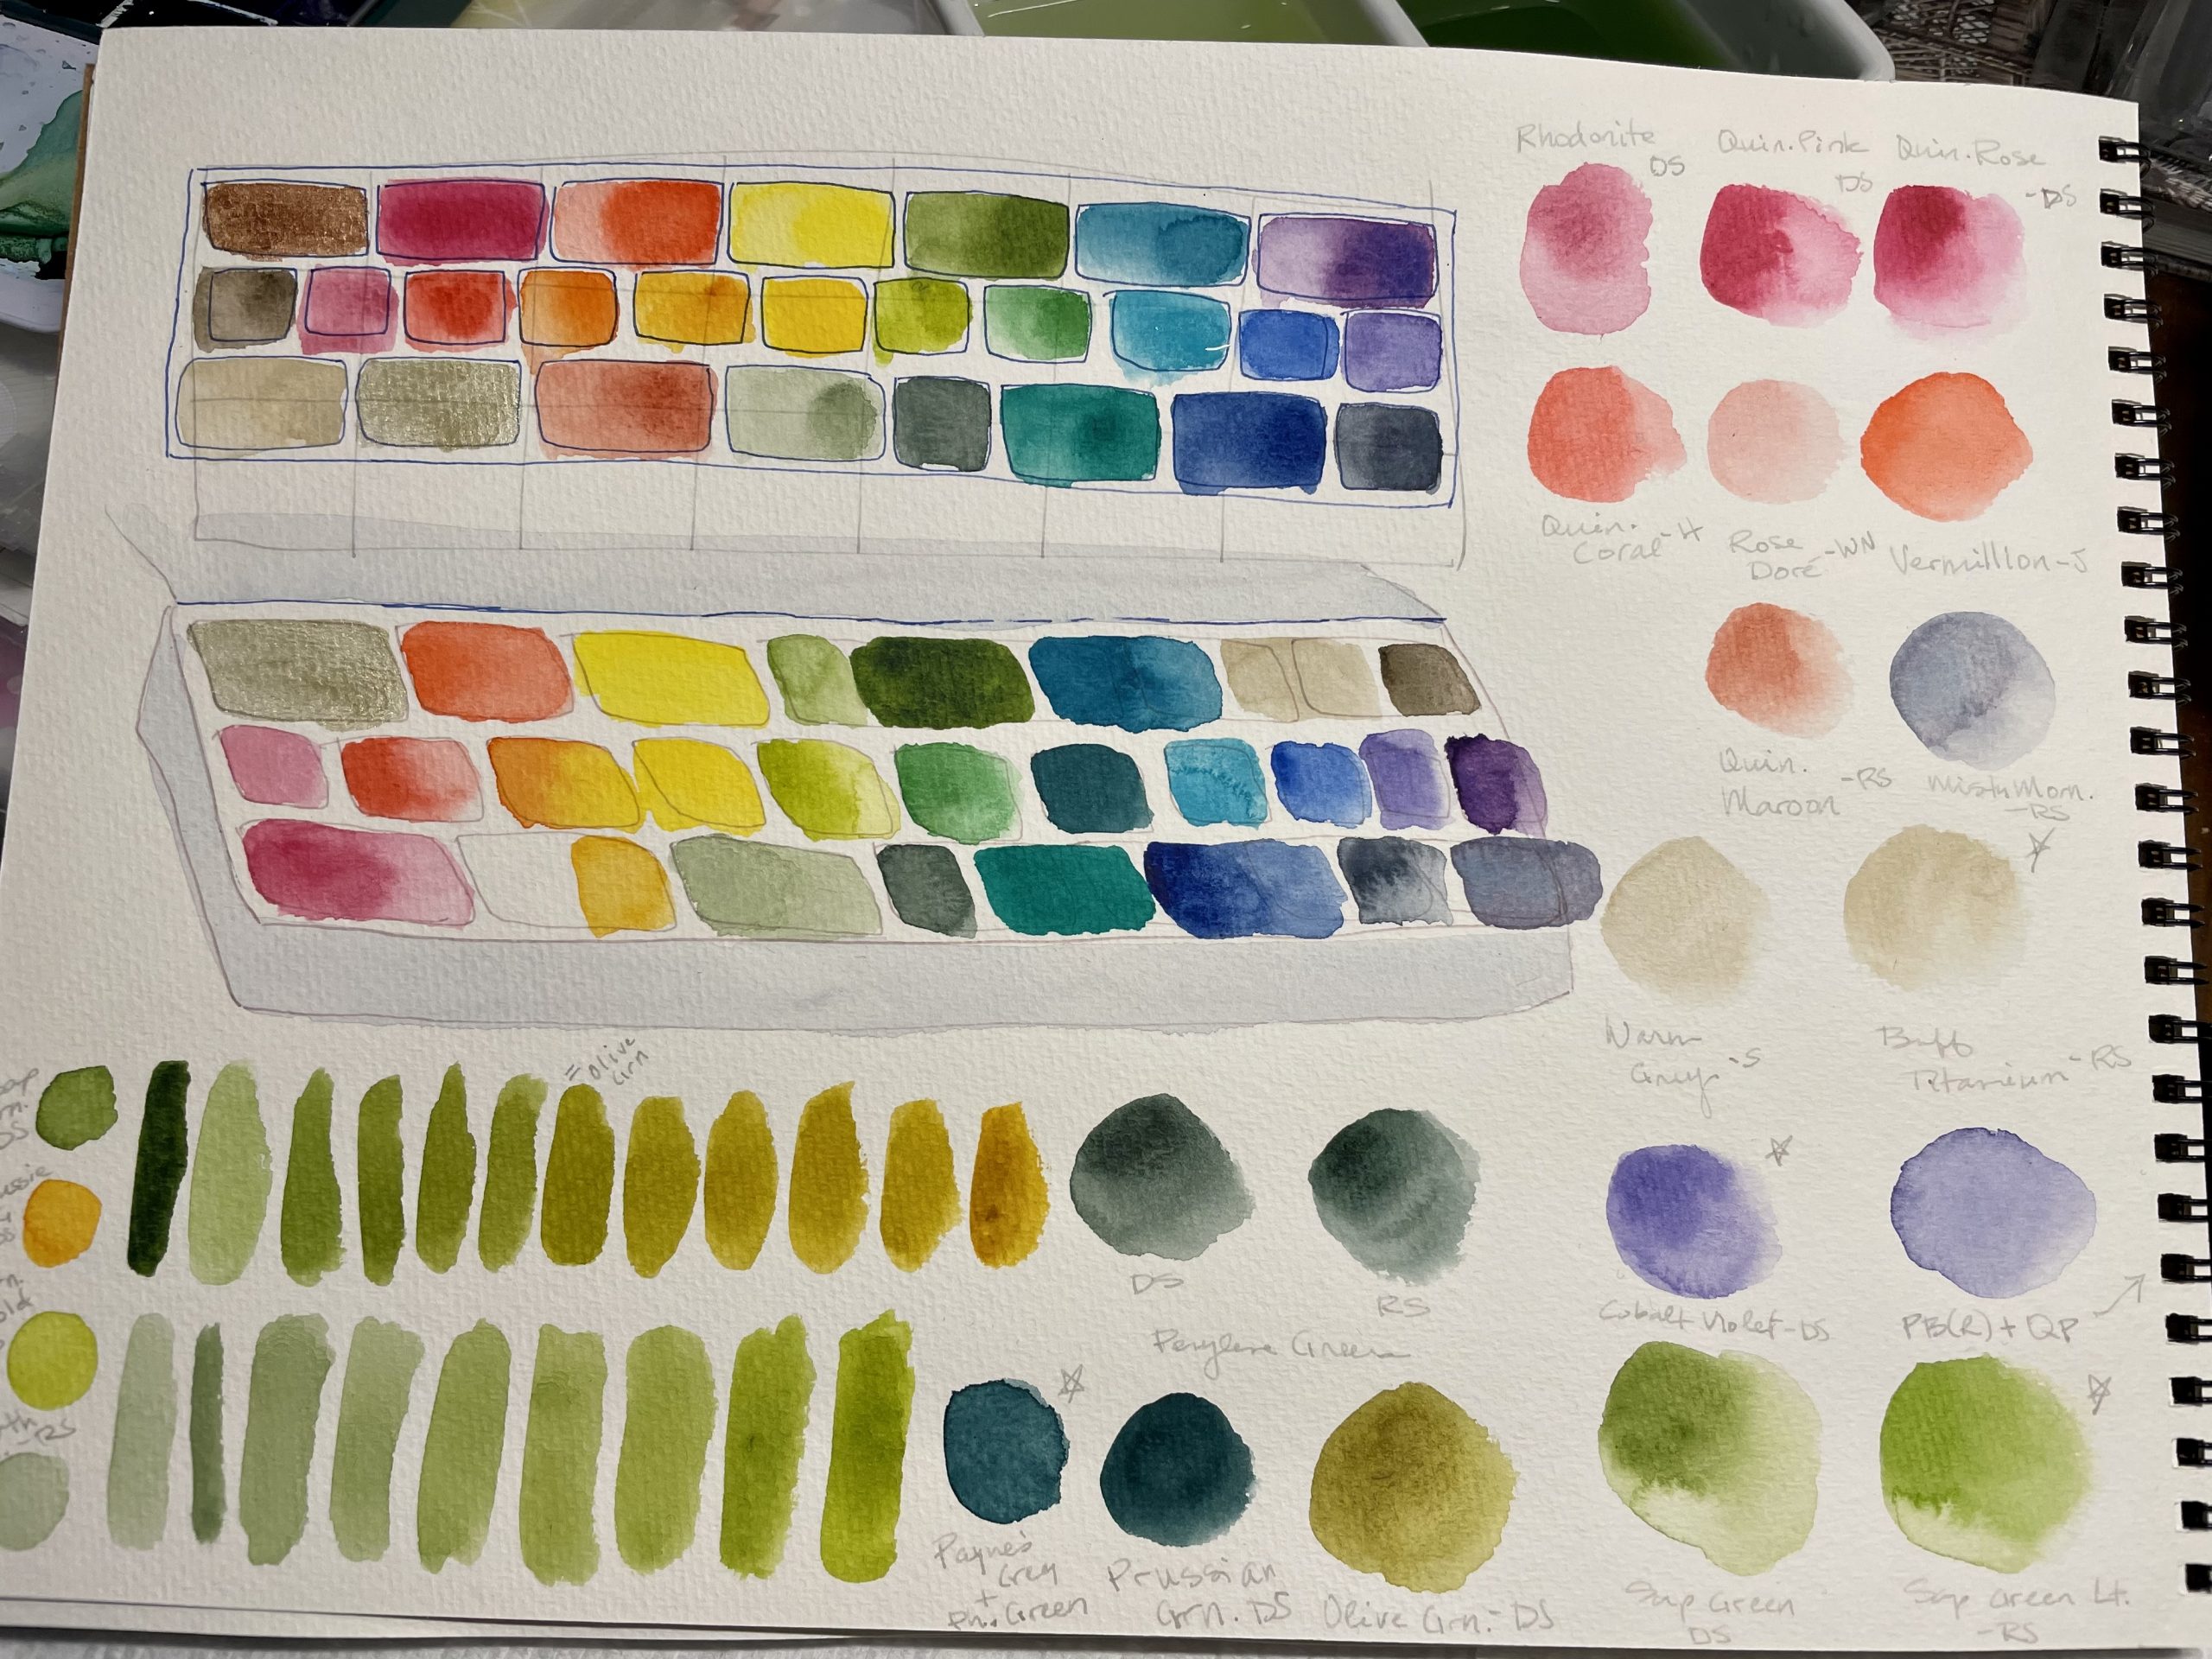 Watercolor charts and comparsons